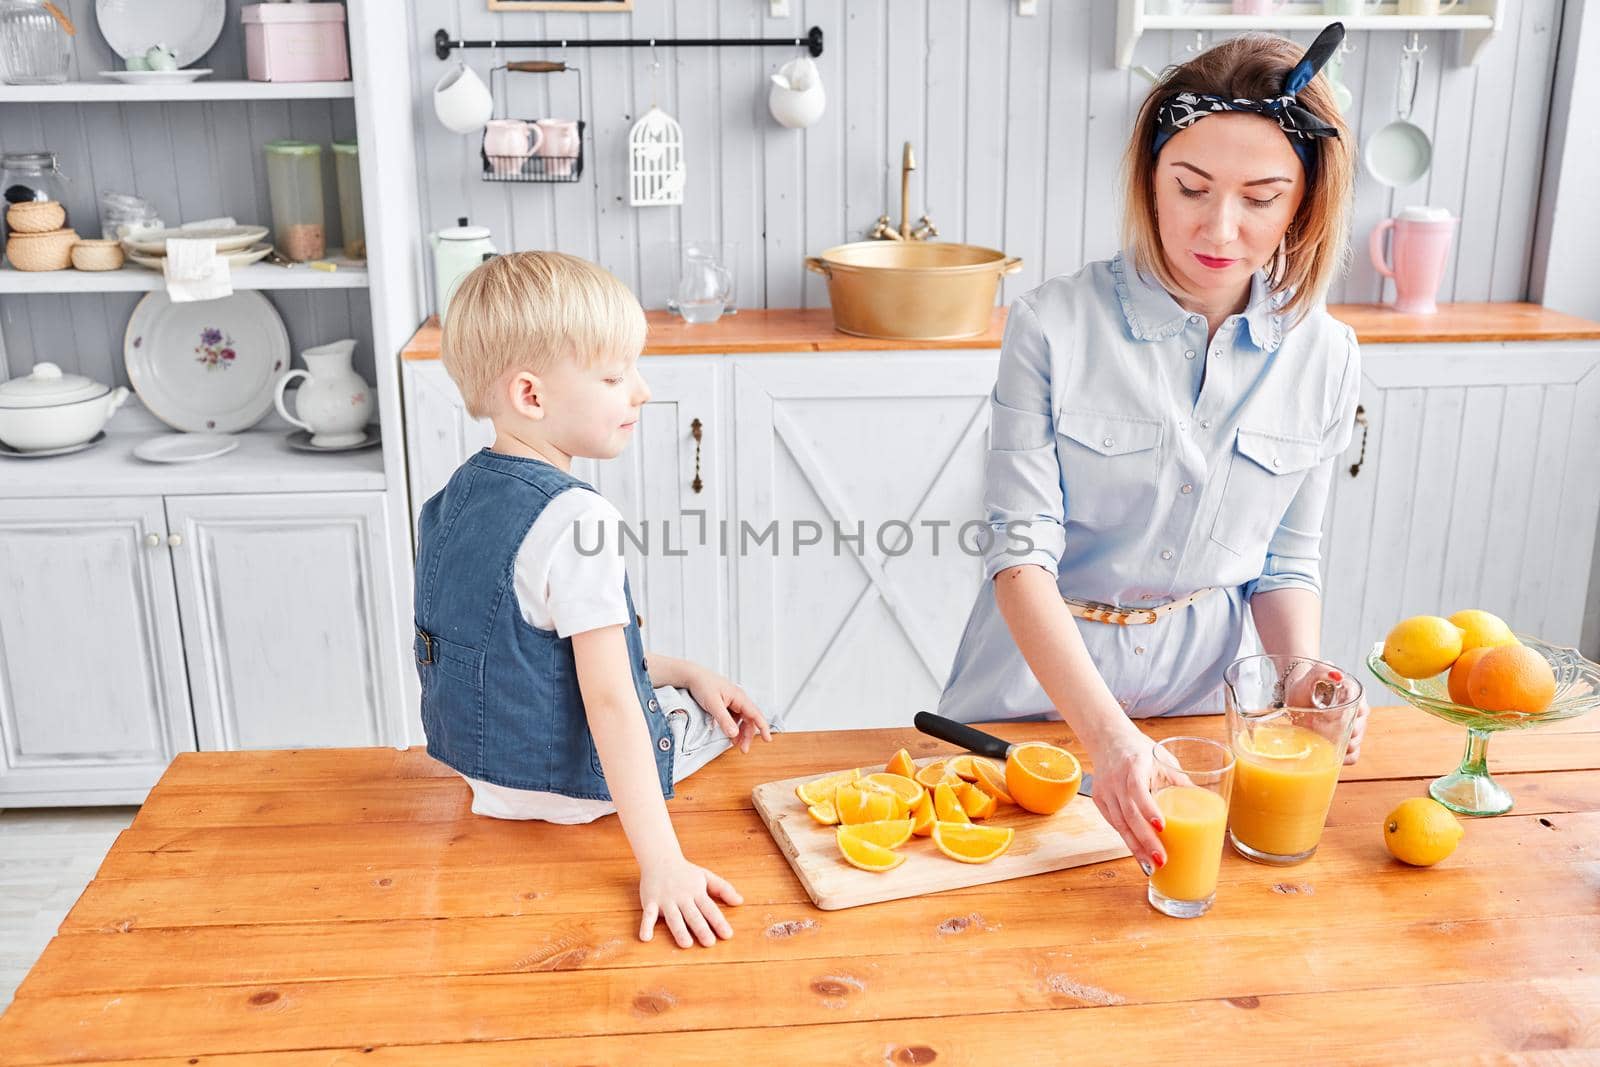 Healthy food, fresh fruit, juicy oranges. Mother and son are smiling while having a breakfast in kitchen. Bright morning in the kitchen. by Malkovkosta